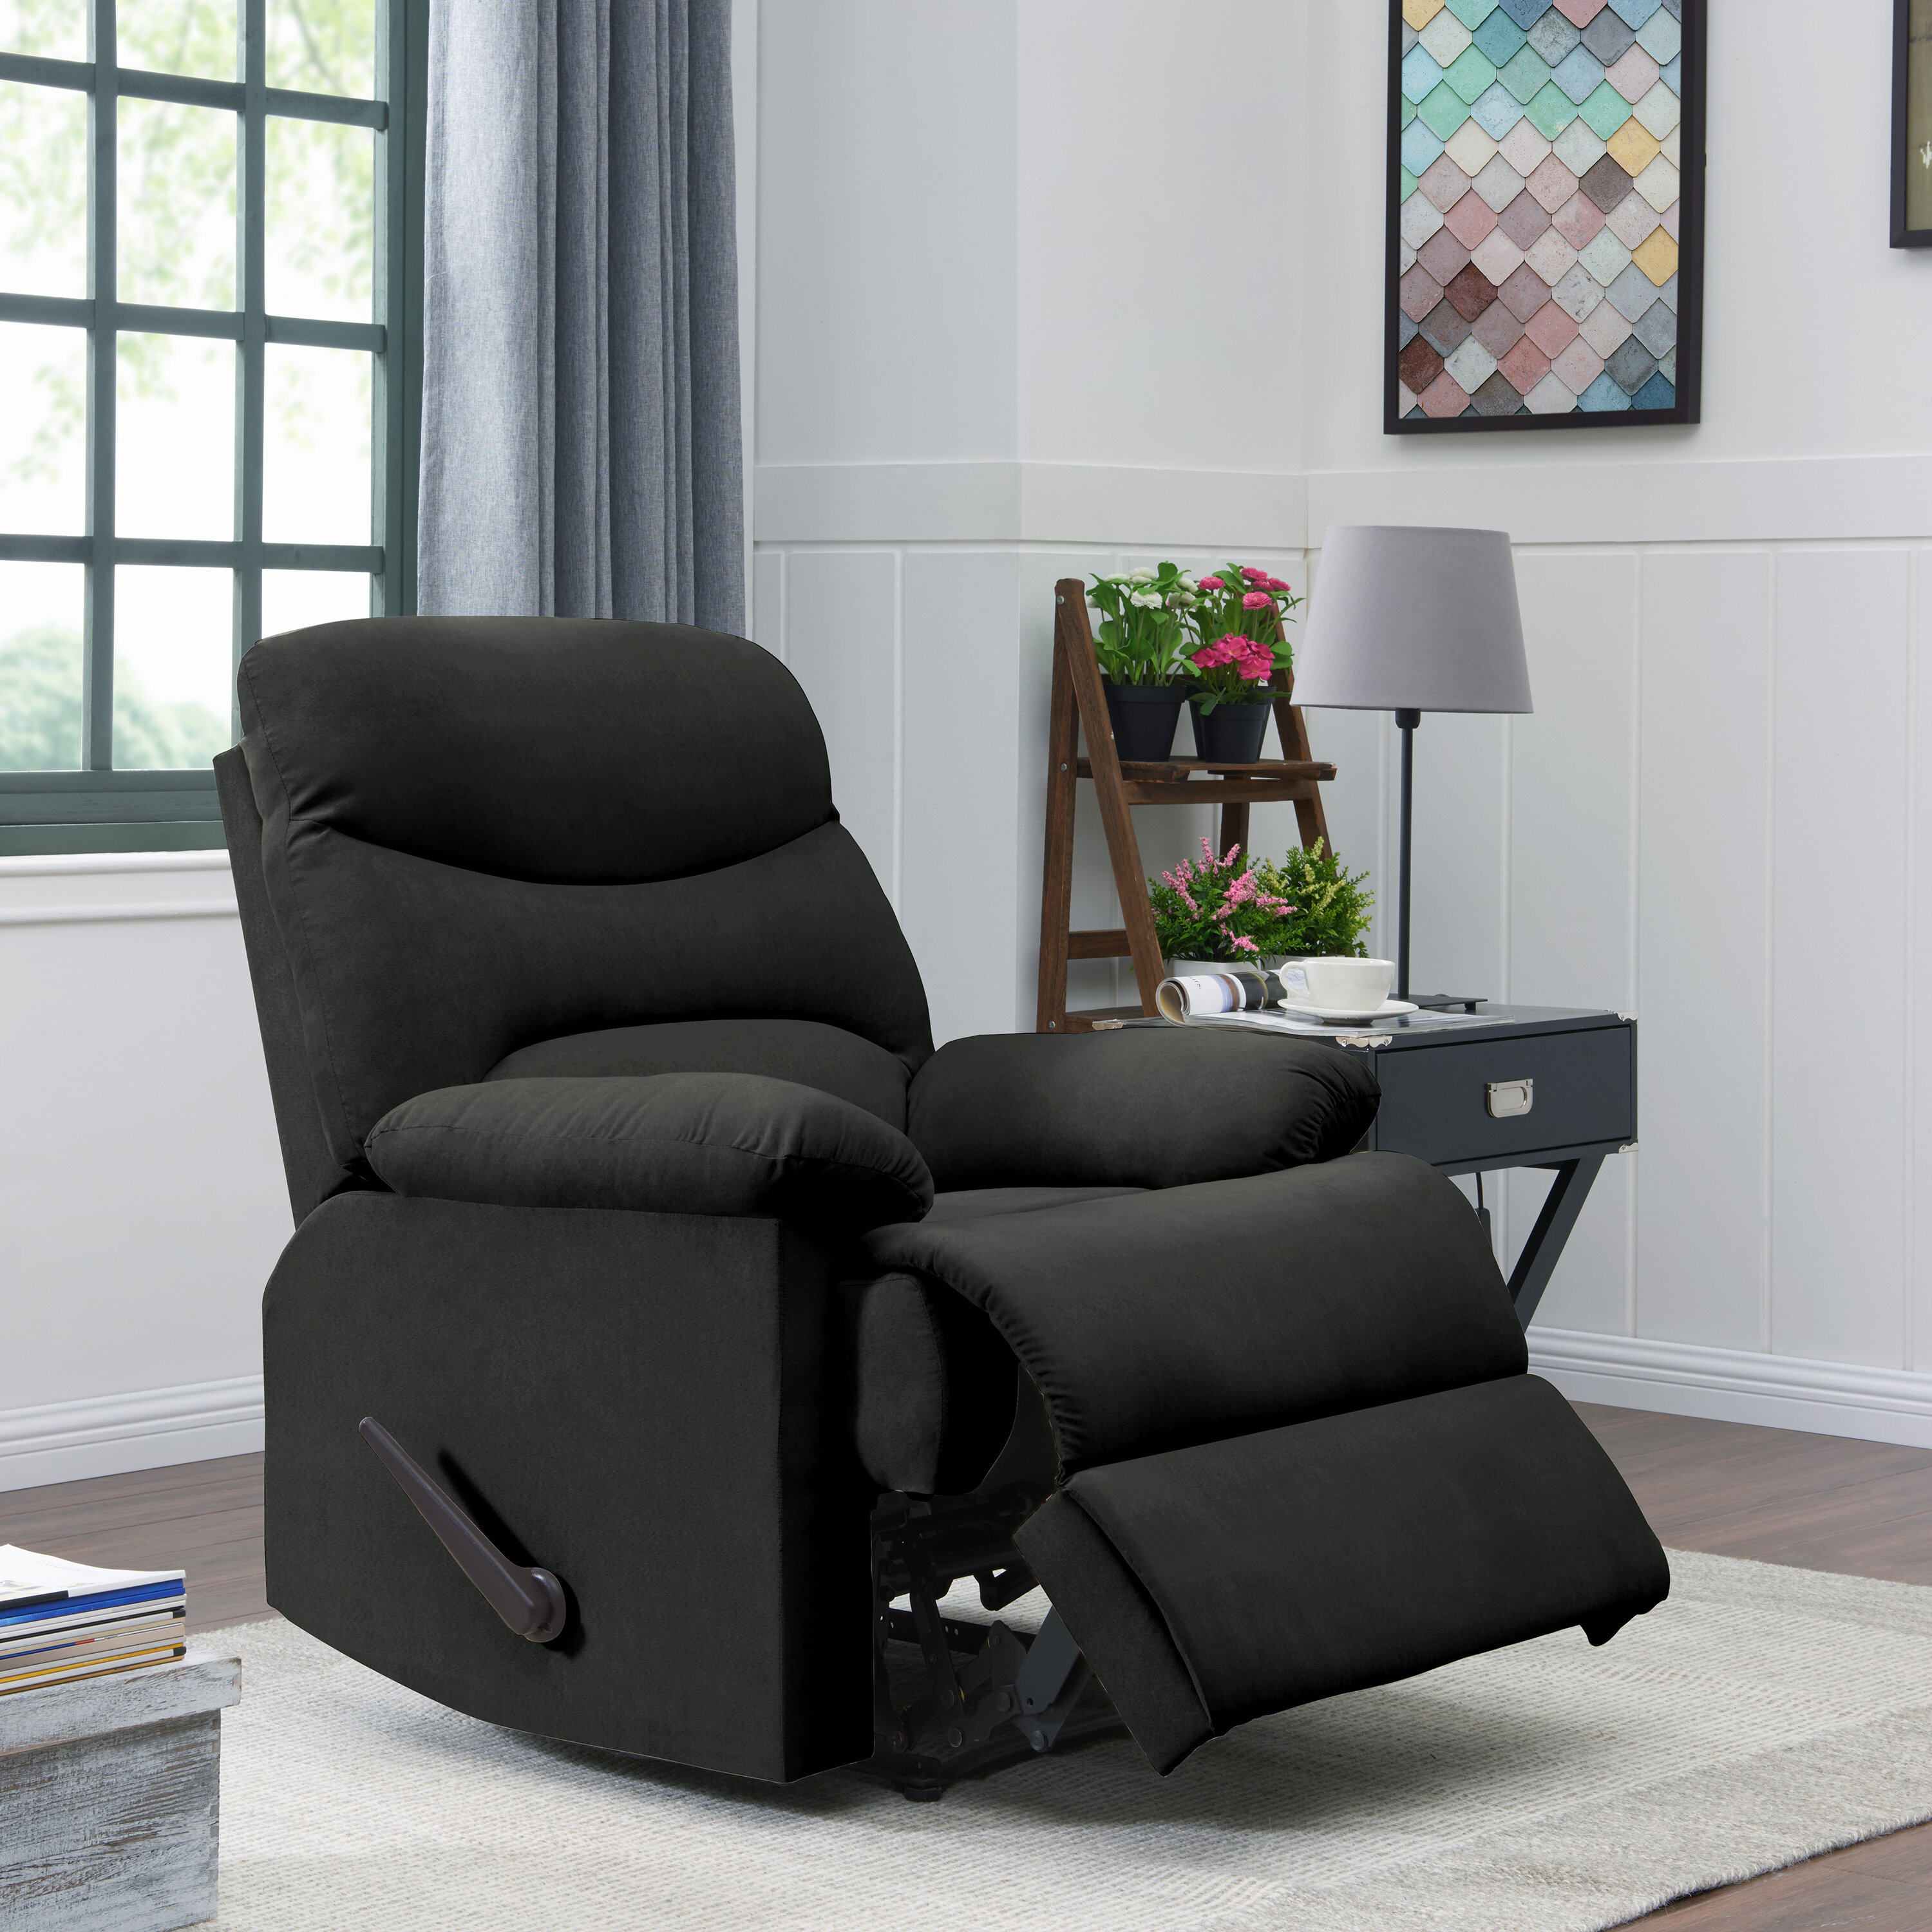 Wall Hugger Recliners Armchairs Lazy Chairs Arm Chair Recliner Living Room NEW 